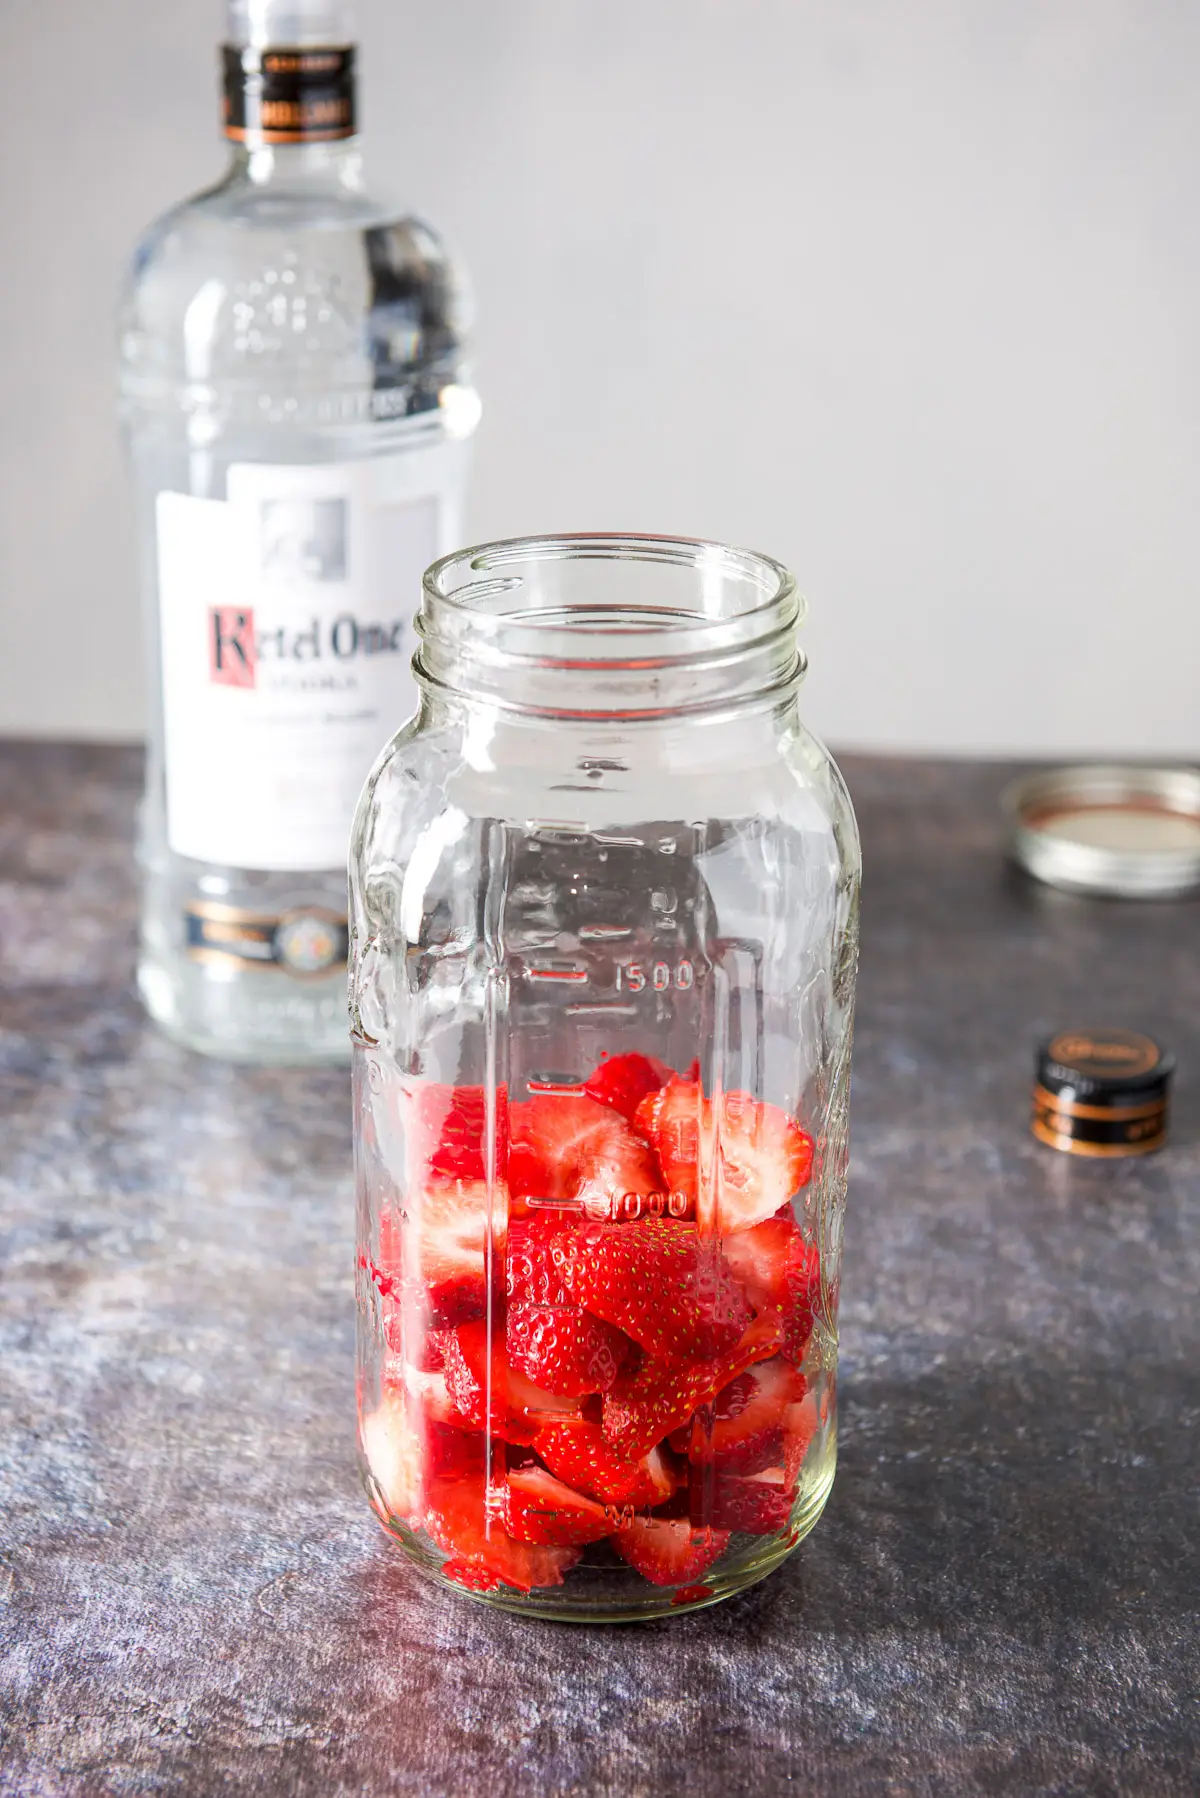 Cut up strawberries in a jar with the bottle of vodka in the background